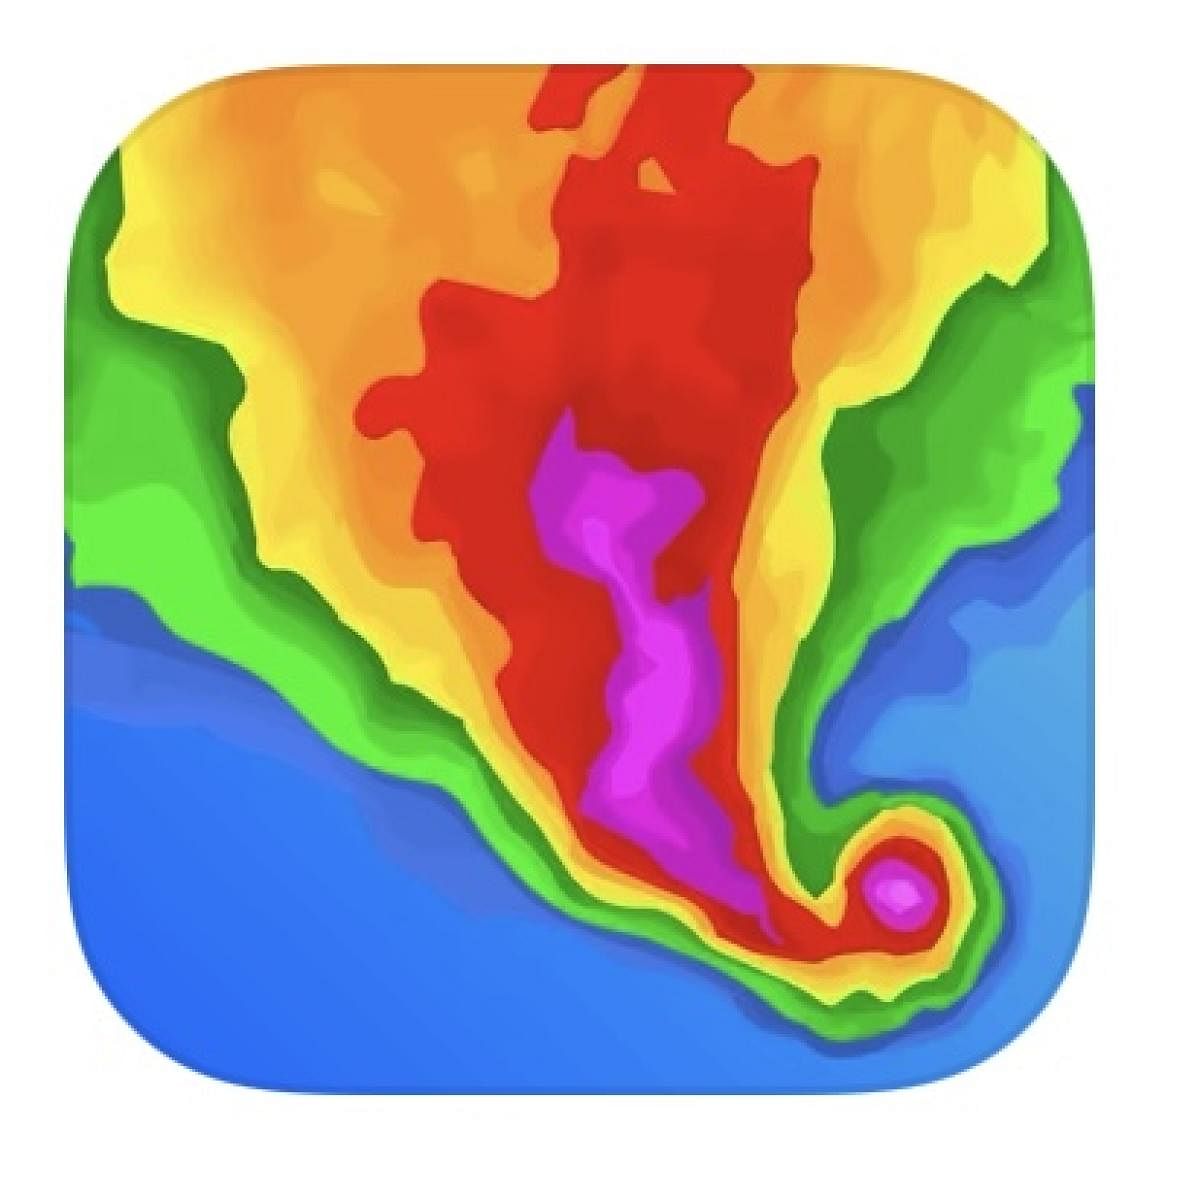 4 apps to keep track of the weather